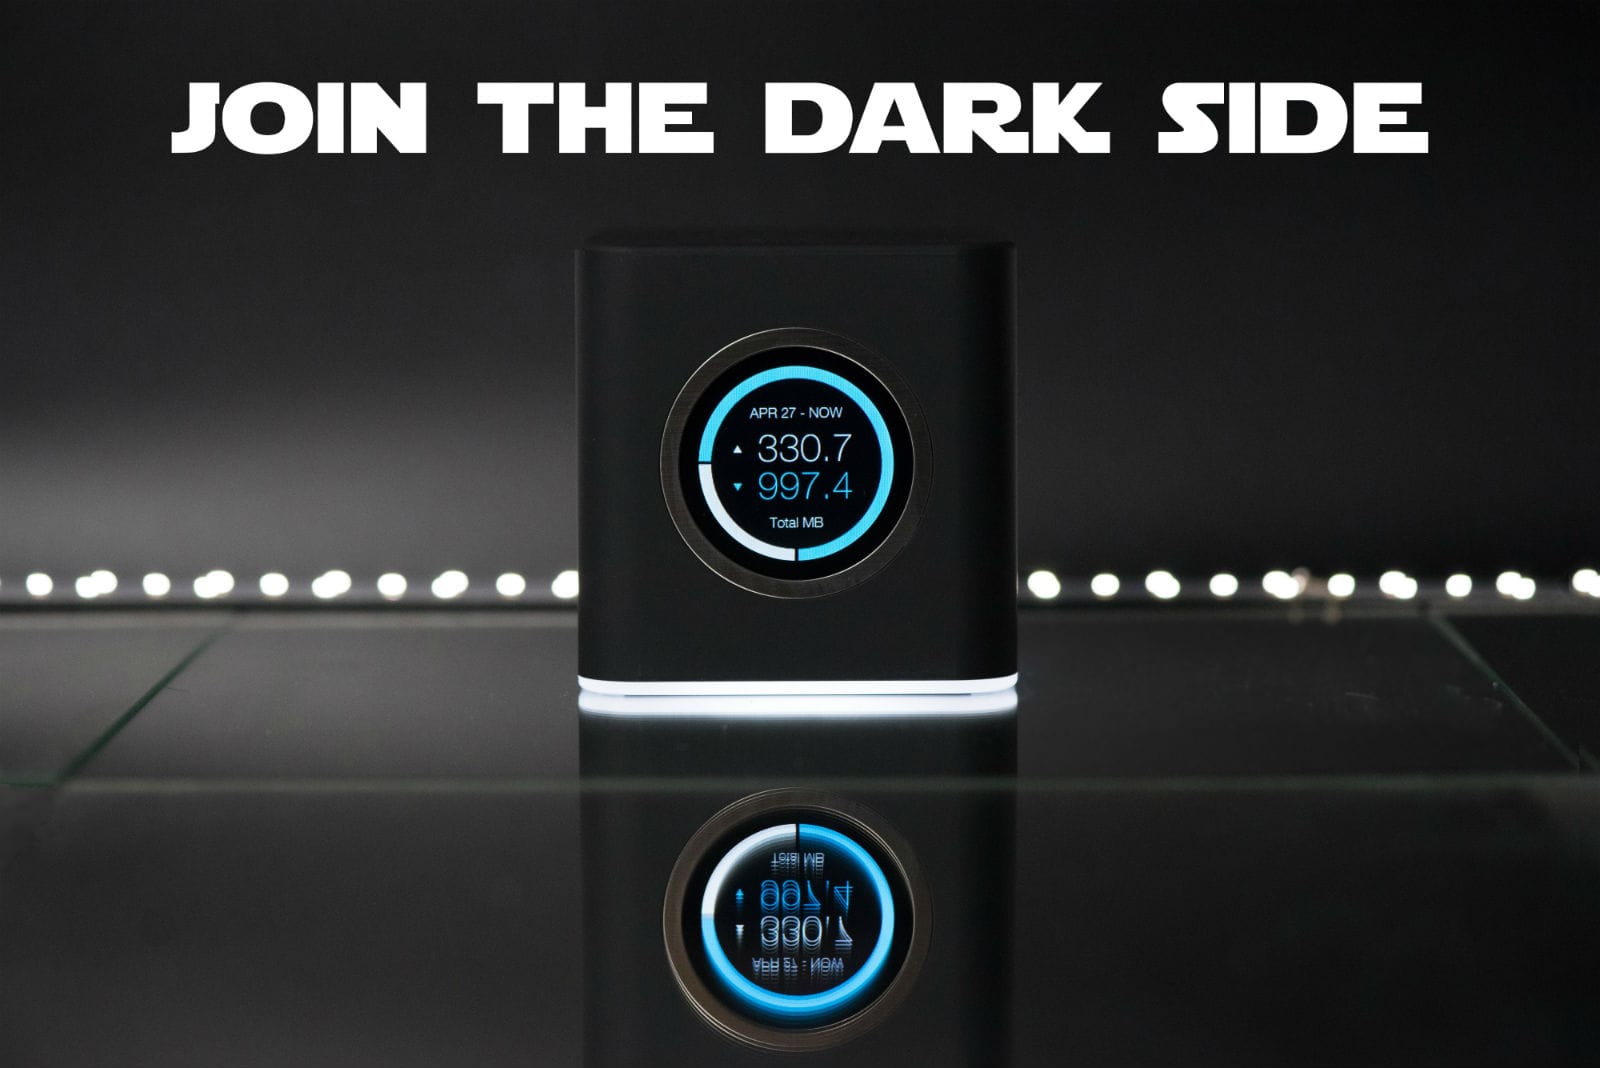 Winning a limited-edition black AmpliFi HD Mesh Router on Star Wars Day is easier than a trench run.